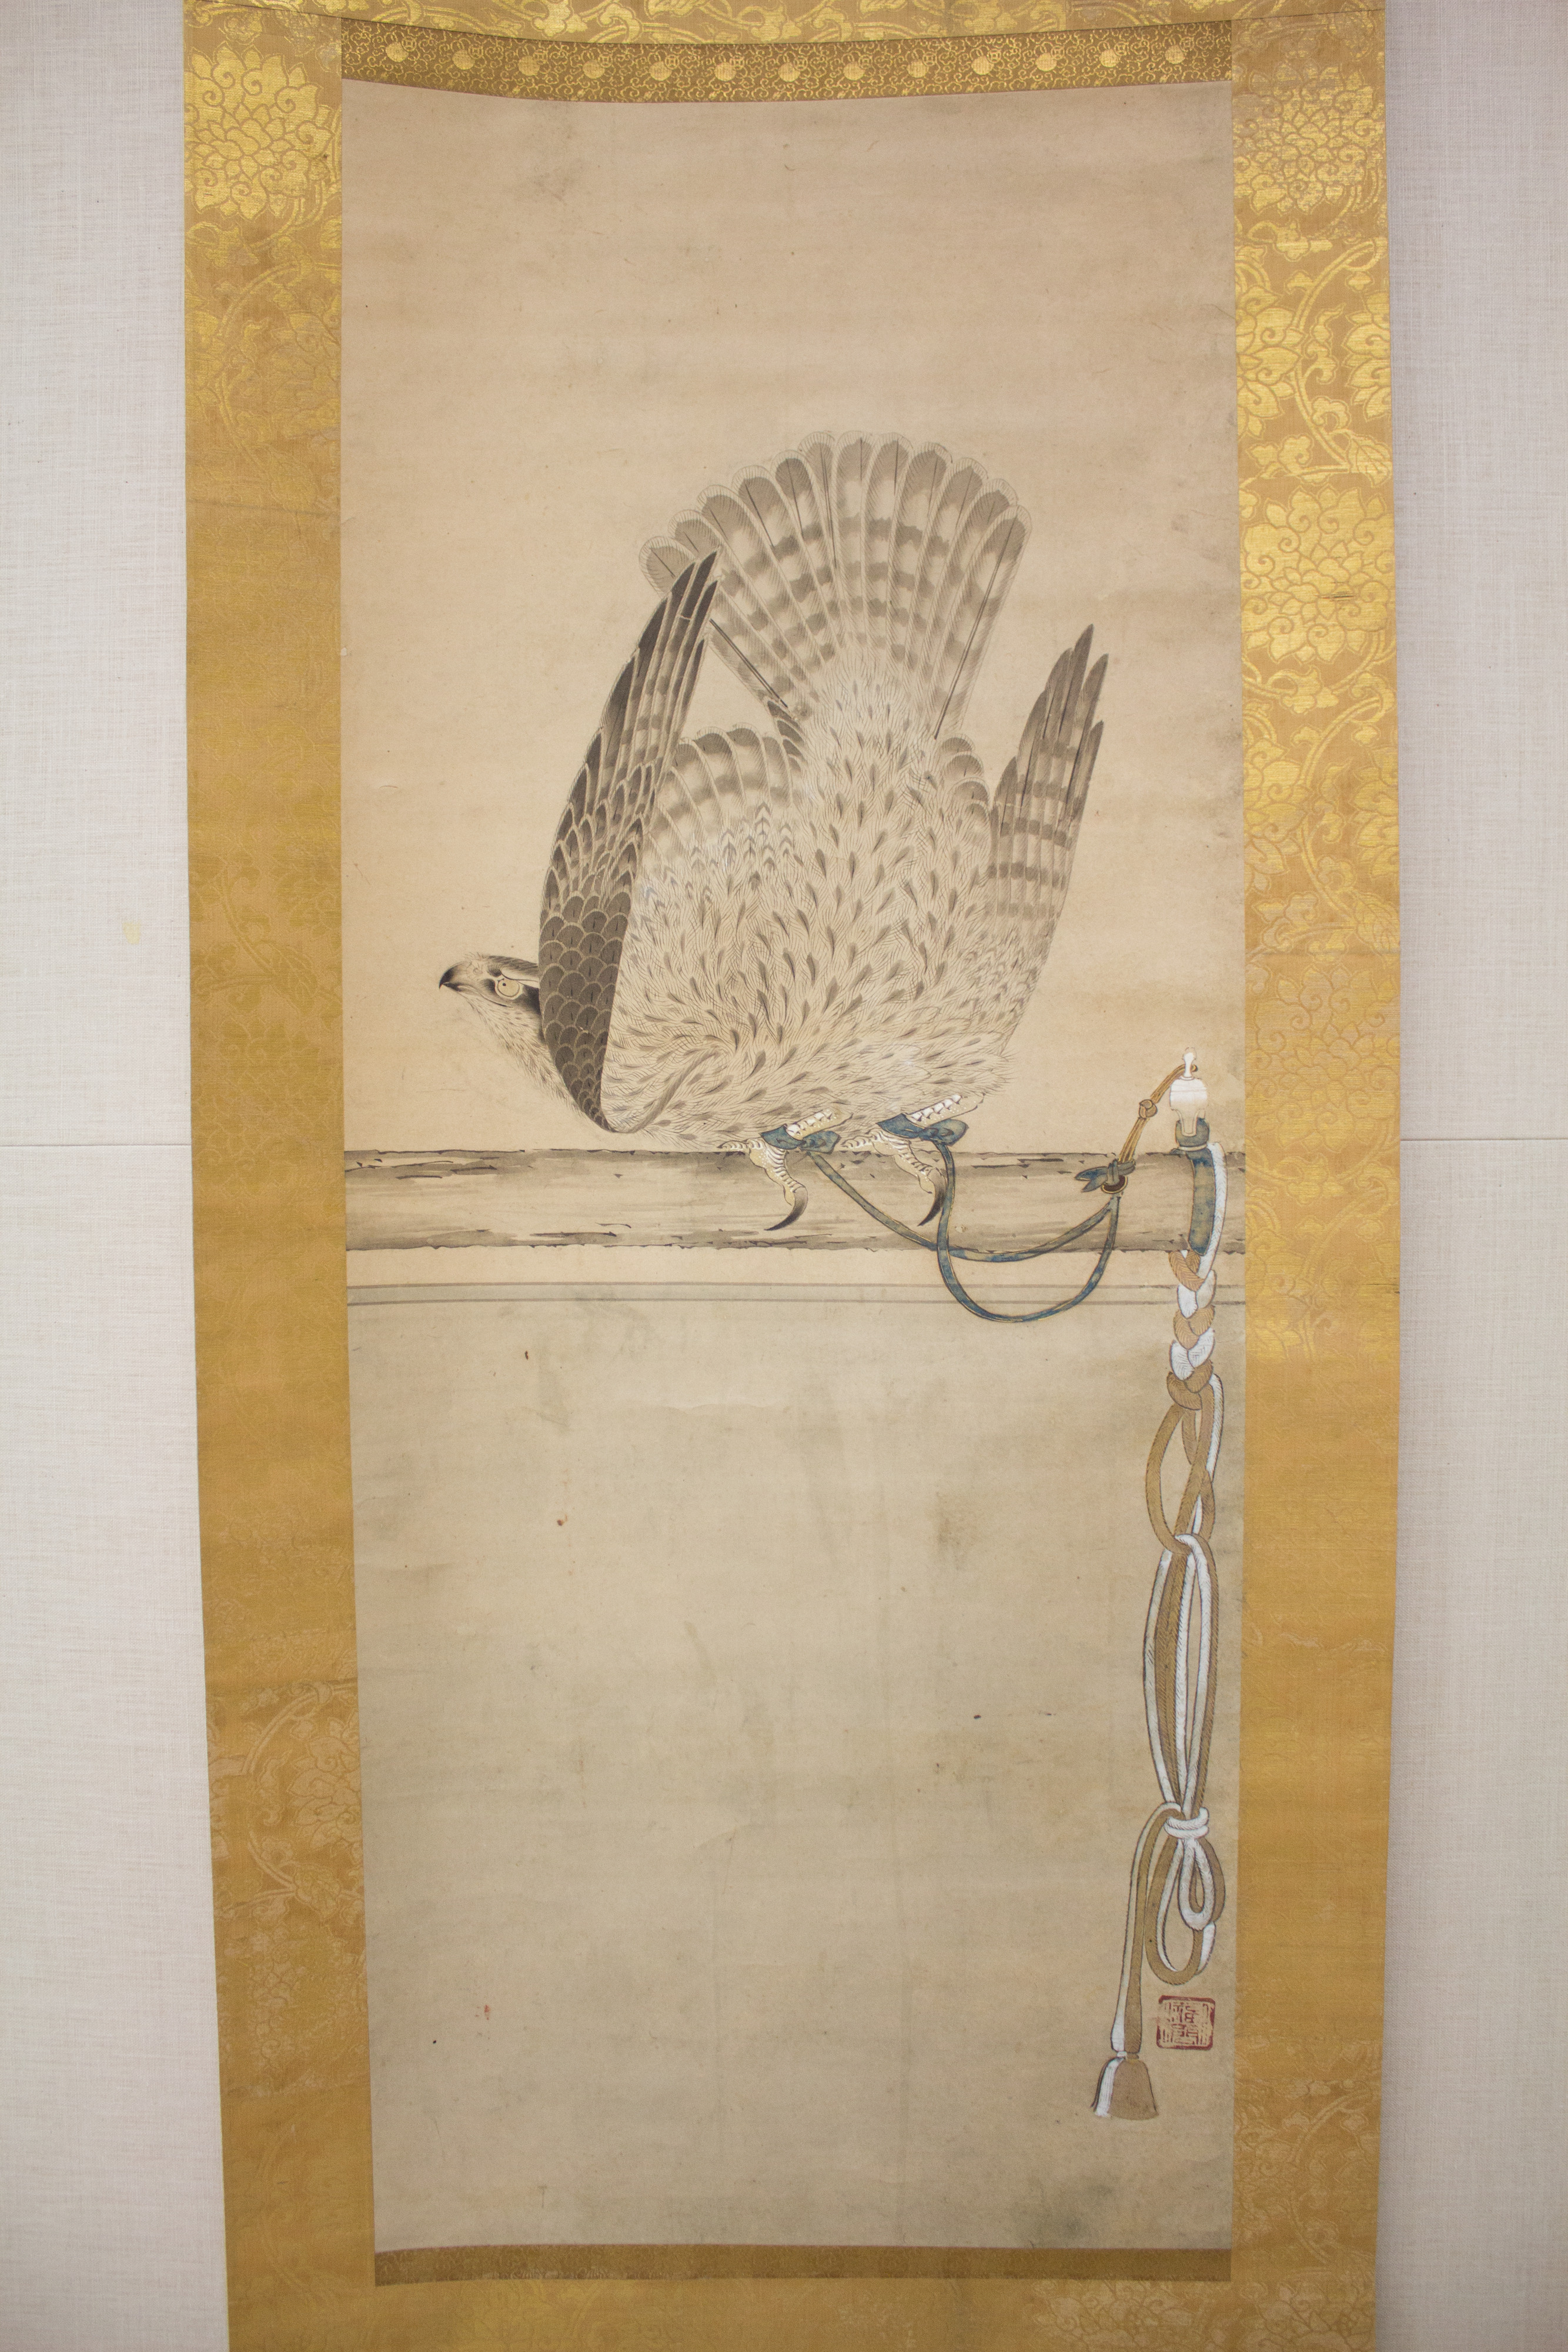 Japanese Art Reproduction. Hawk With Outstretched Wings C. 